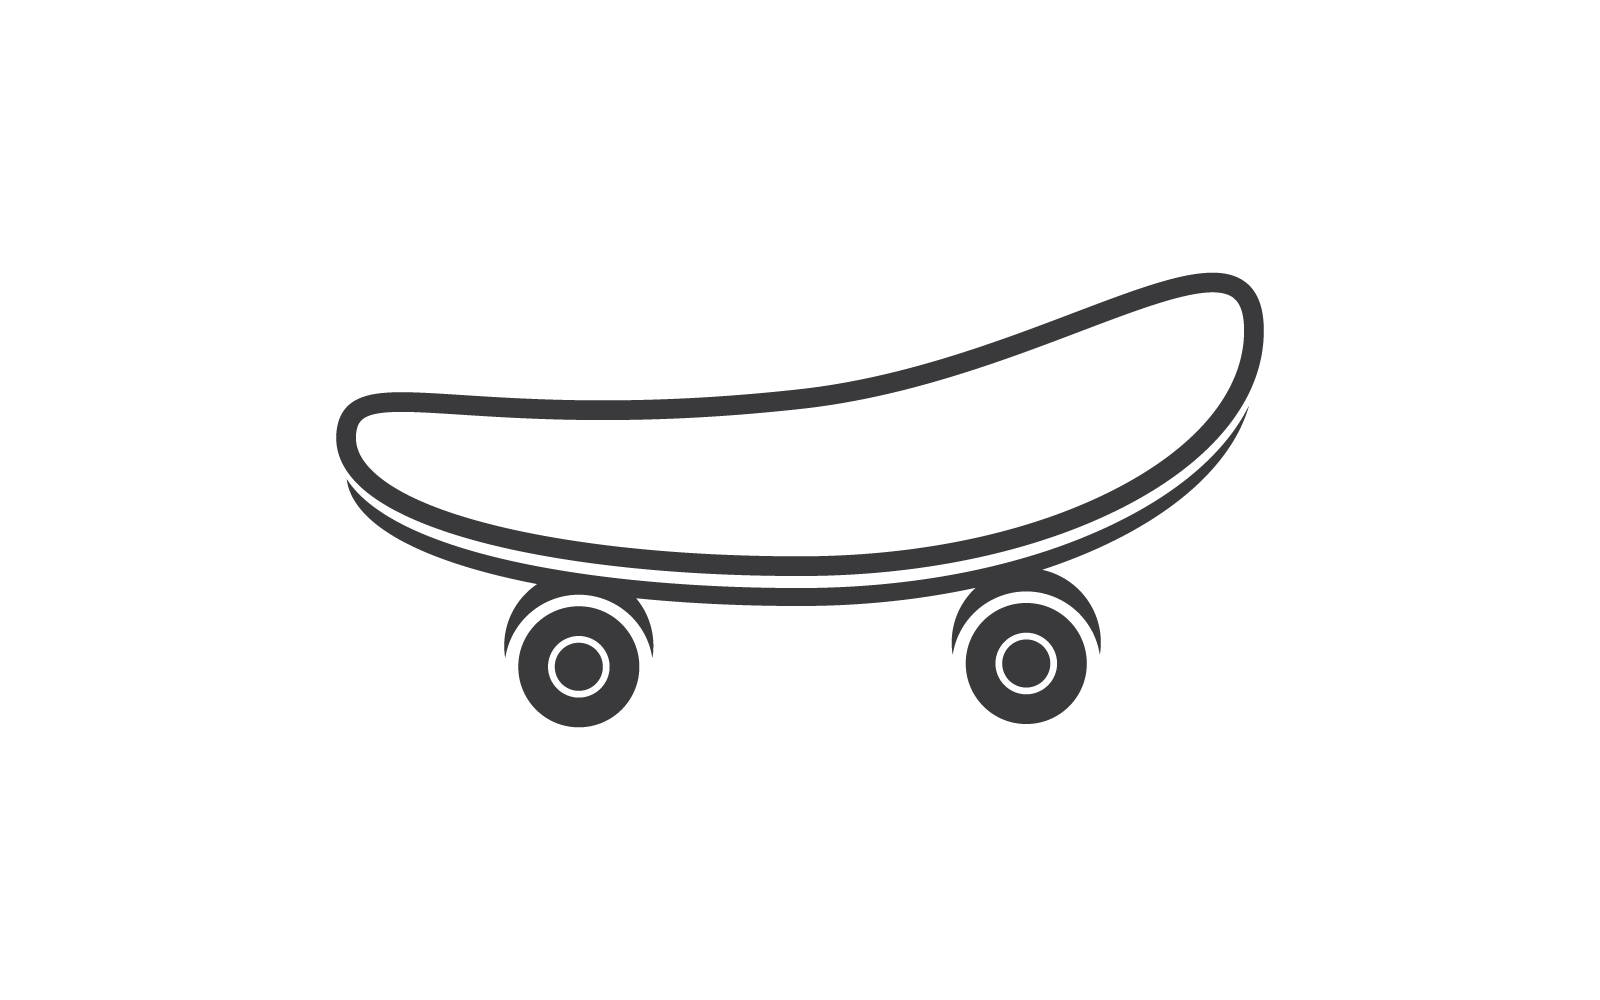 Skateboard line icon illustration vector  is the logo and icon for sports skater entertainment